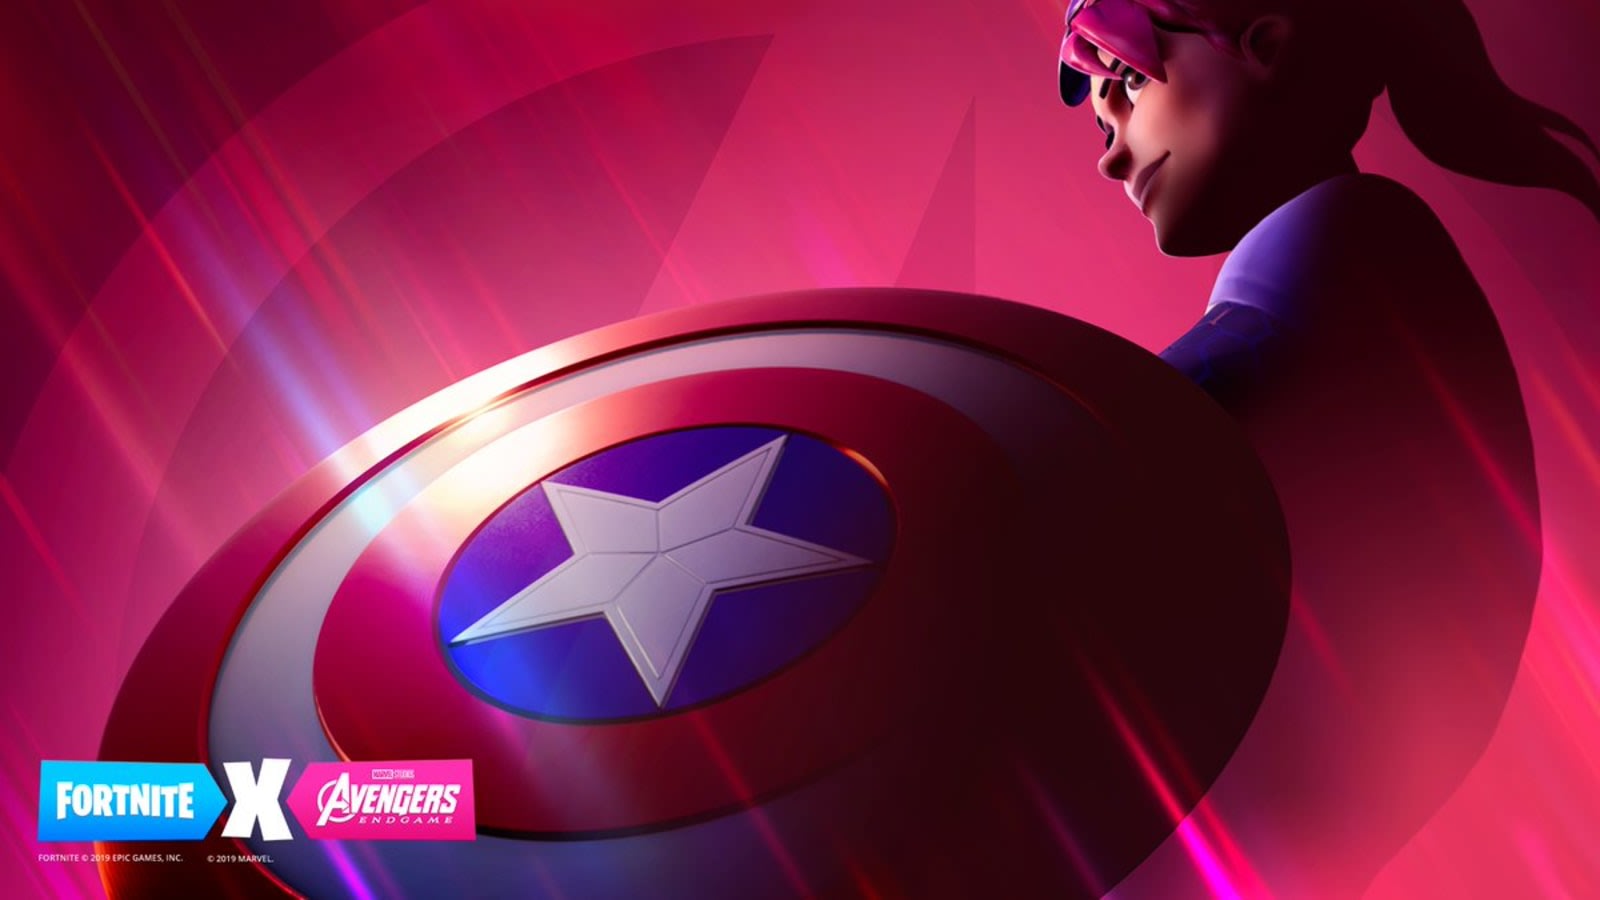 avengers endgame event is coming to fortnite this week - when is the next fortnite update coming out